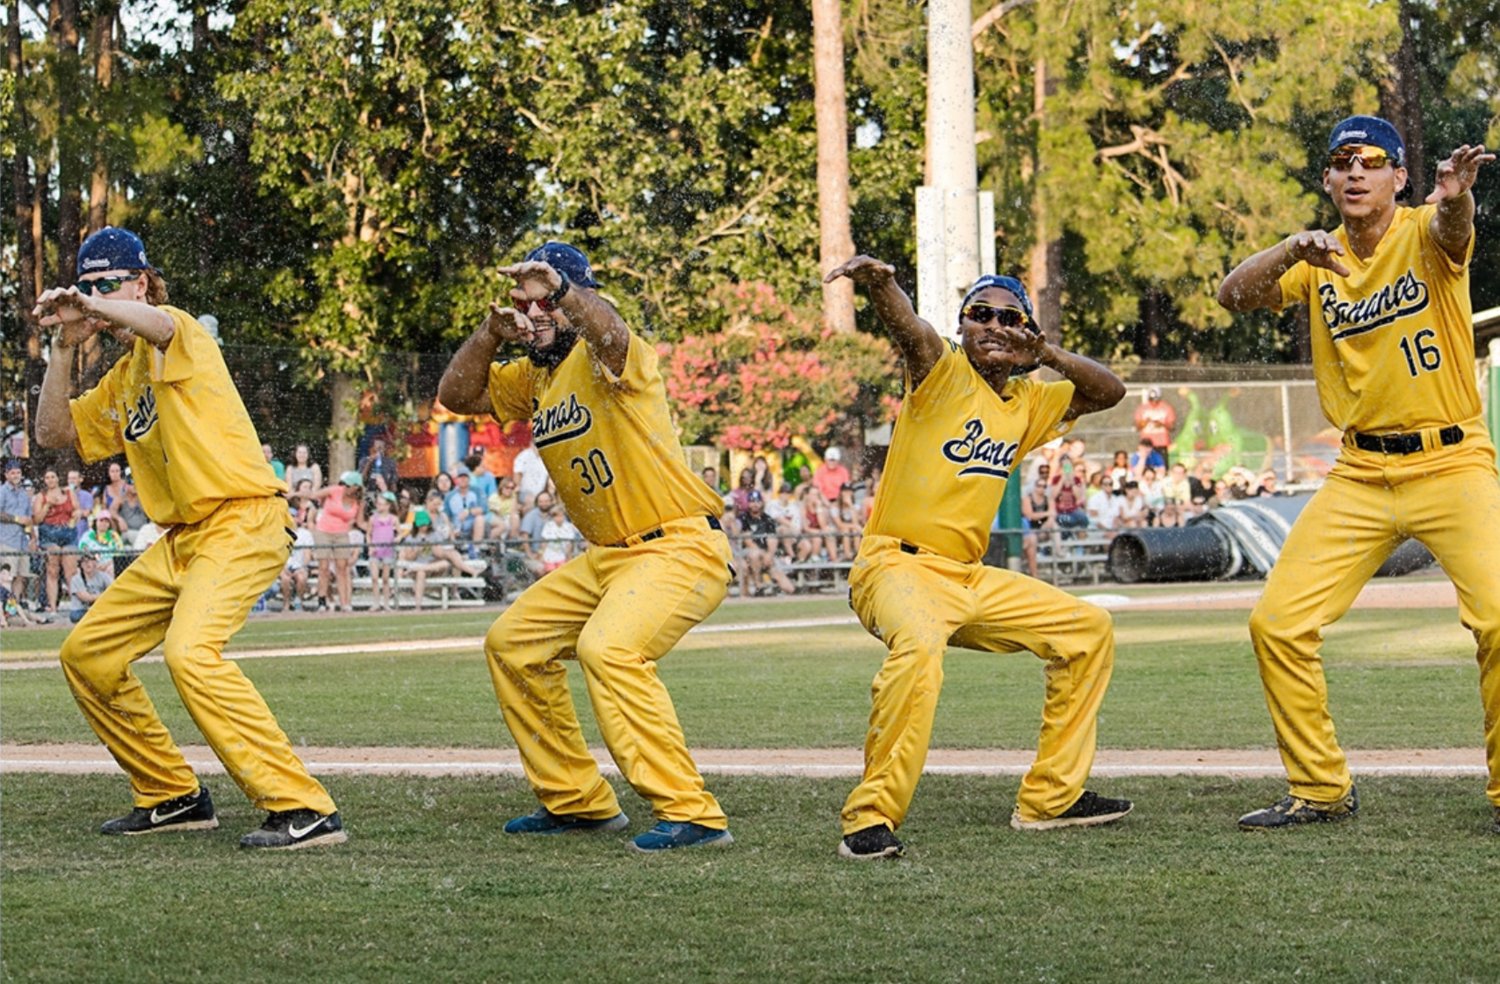 Members of the Savannah Bananas baseball team strike a pose as they dance during a recent game. In addition to accomplished baseball players, the team is also known for a variety of dance moves and attention-grabbing performances.